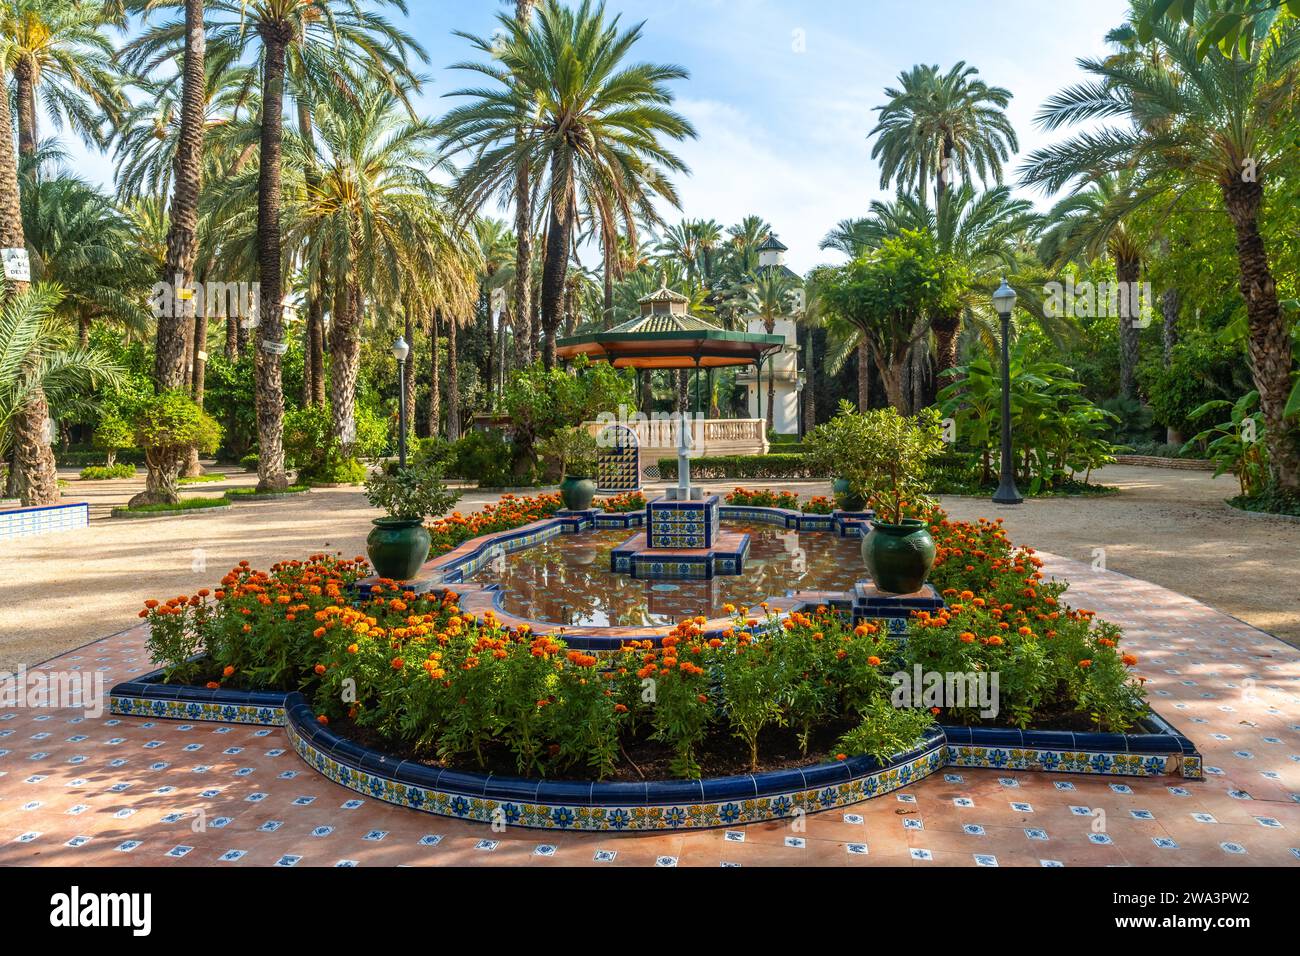 Temple or pergola with a fountain in the Palm Grove Park in the city of Elche. Spain Stock Photo